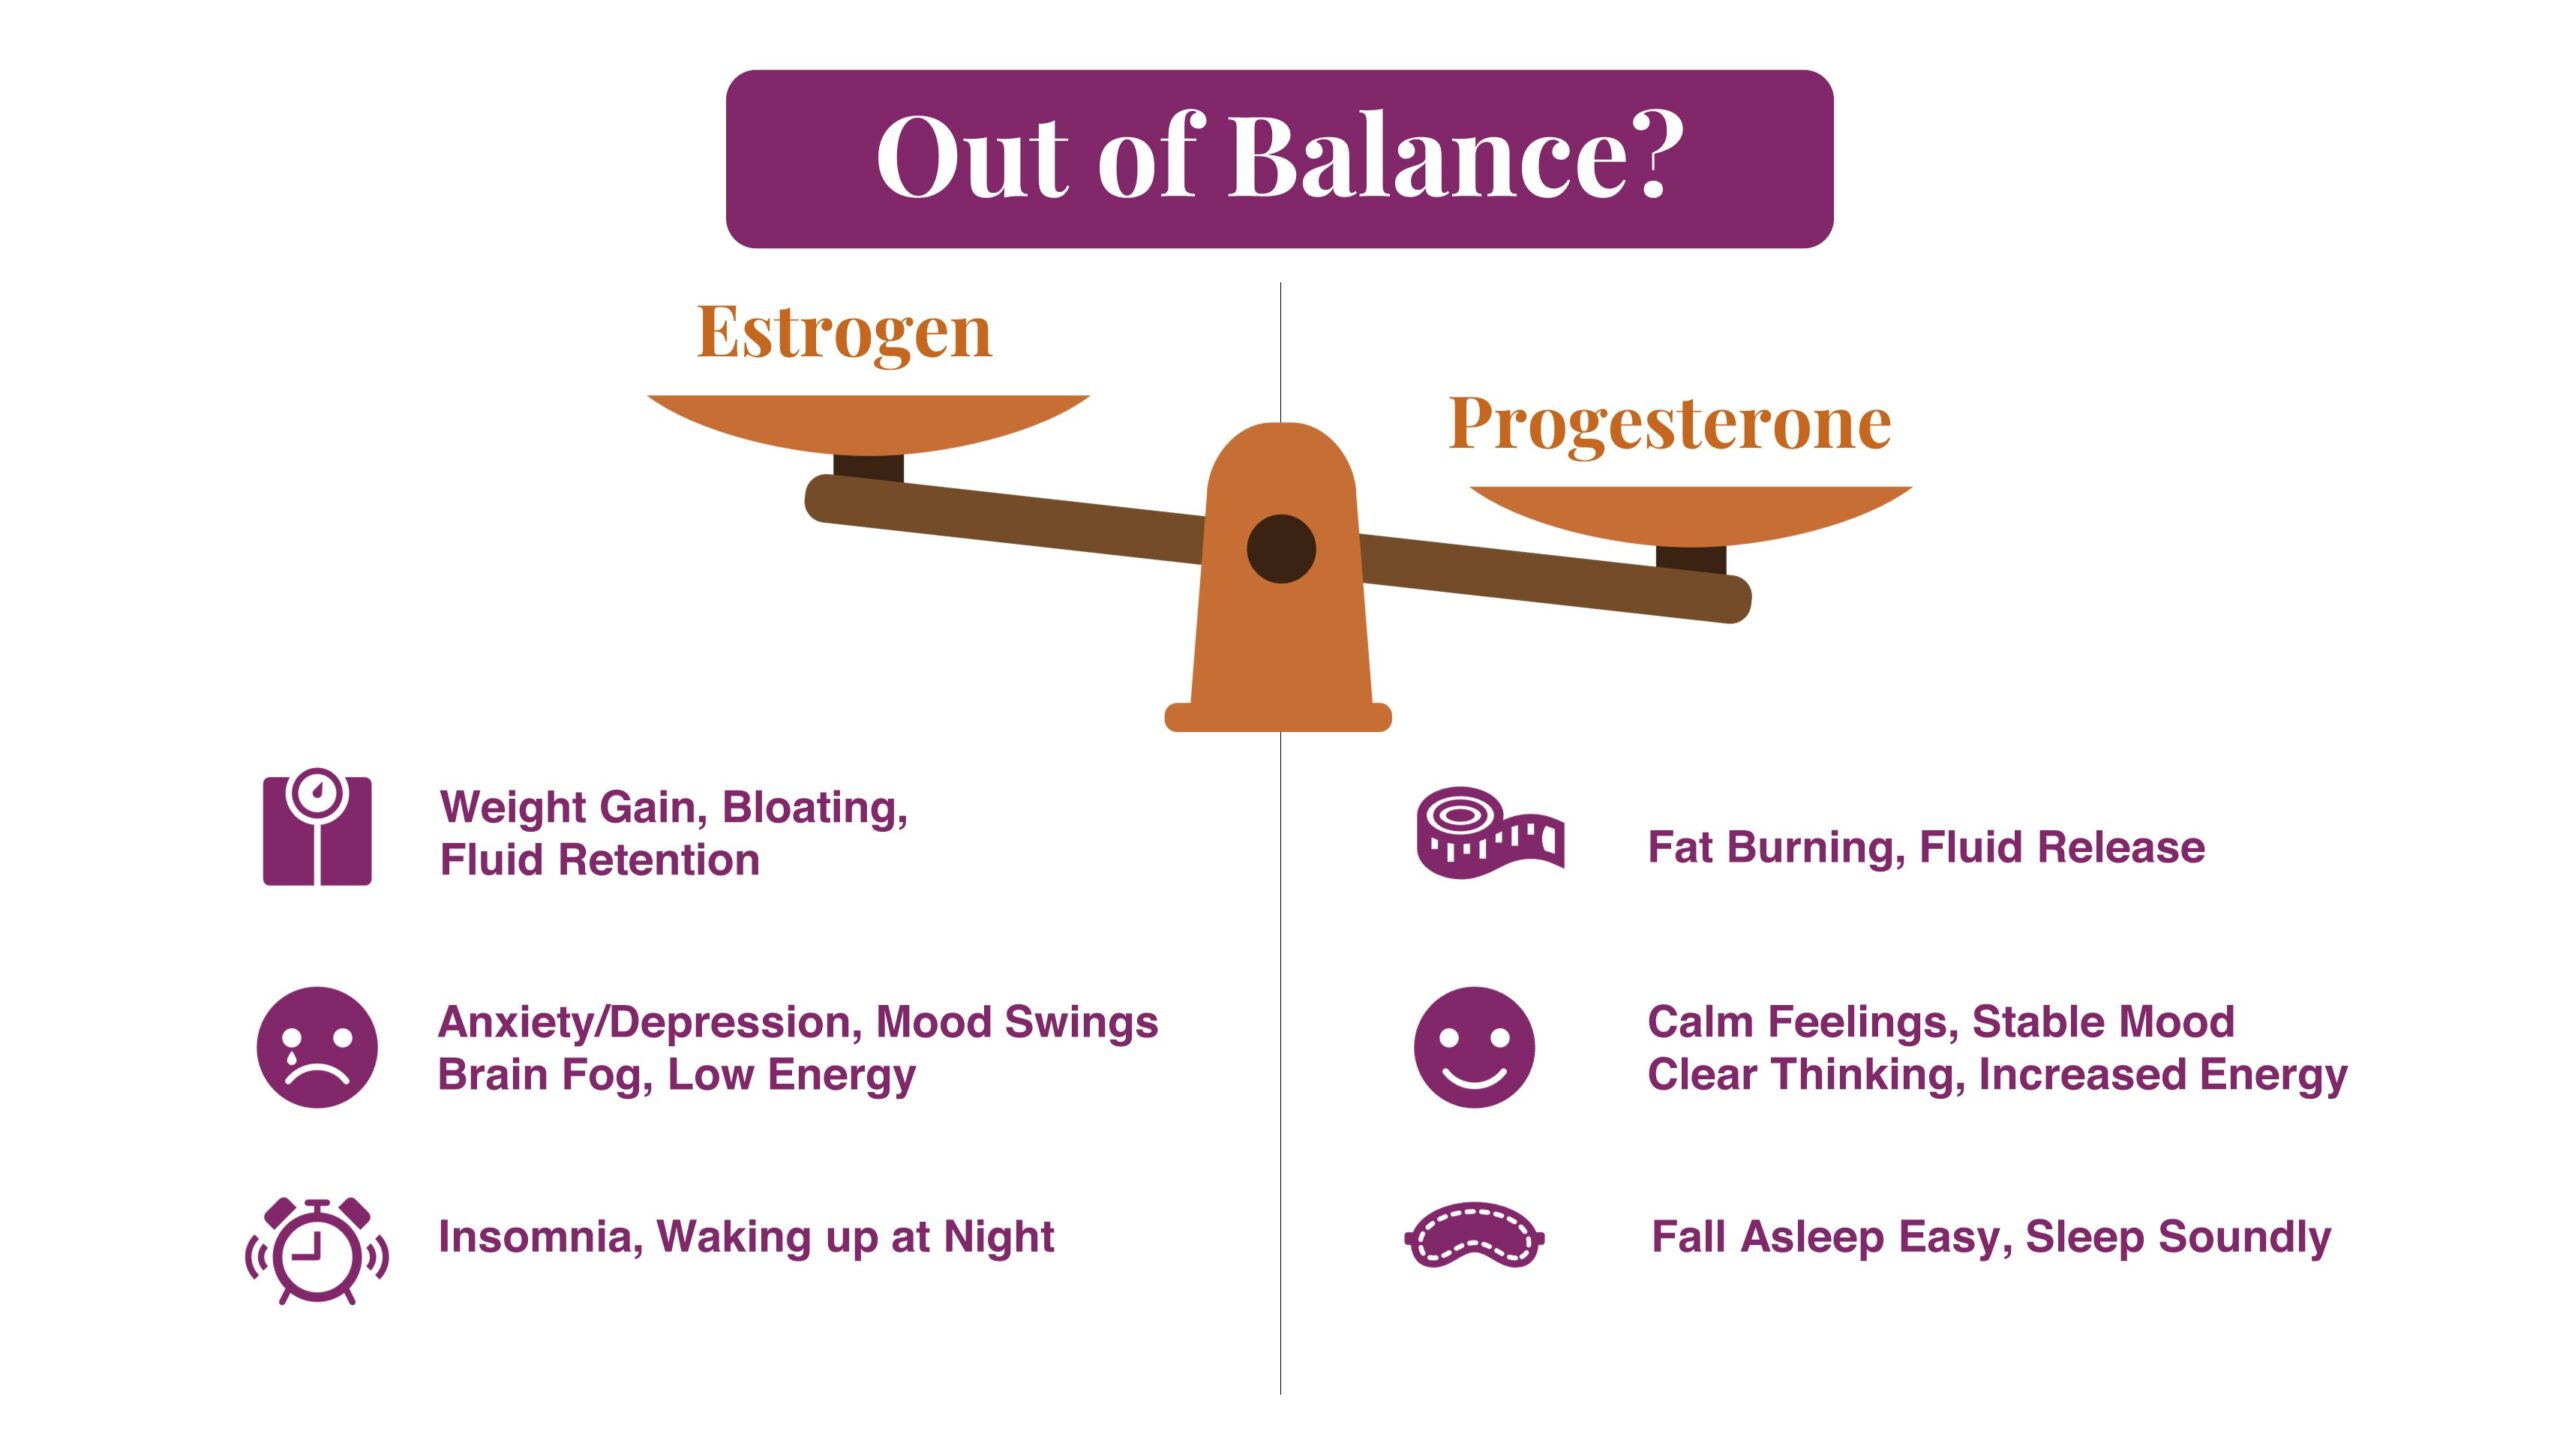 Estrogen and progesterone out of balance